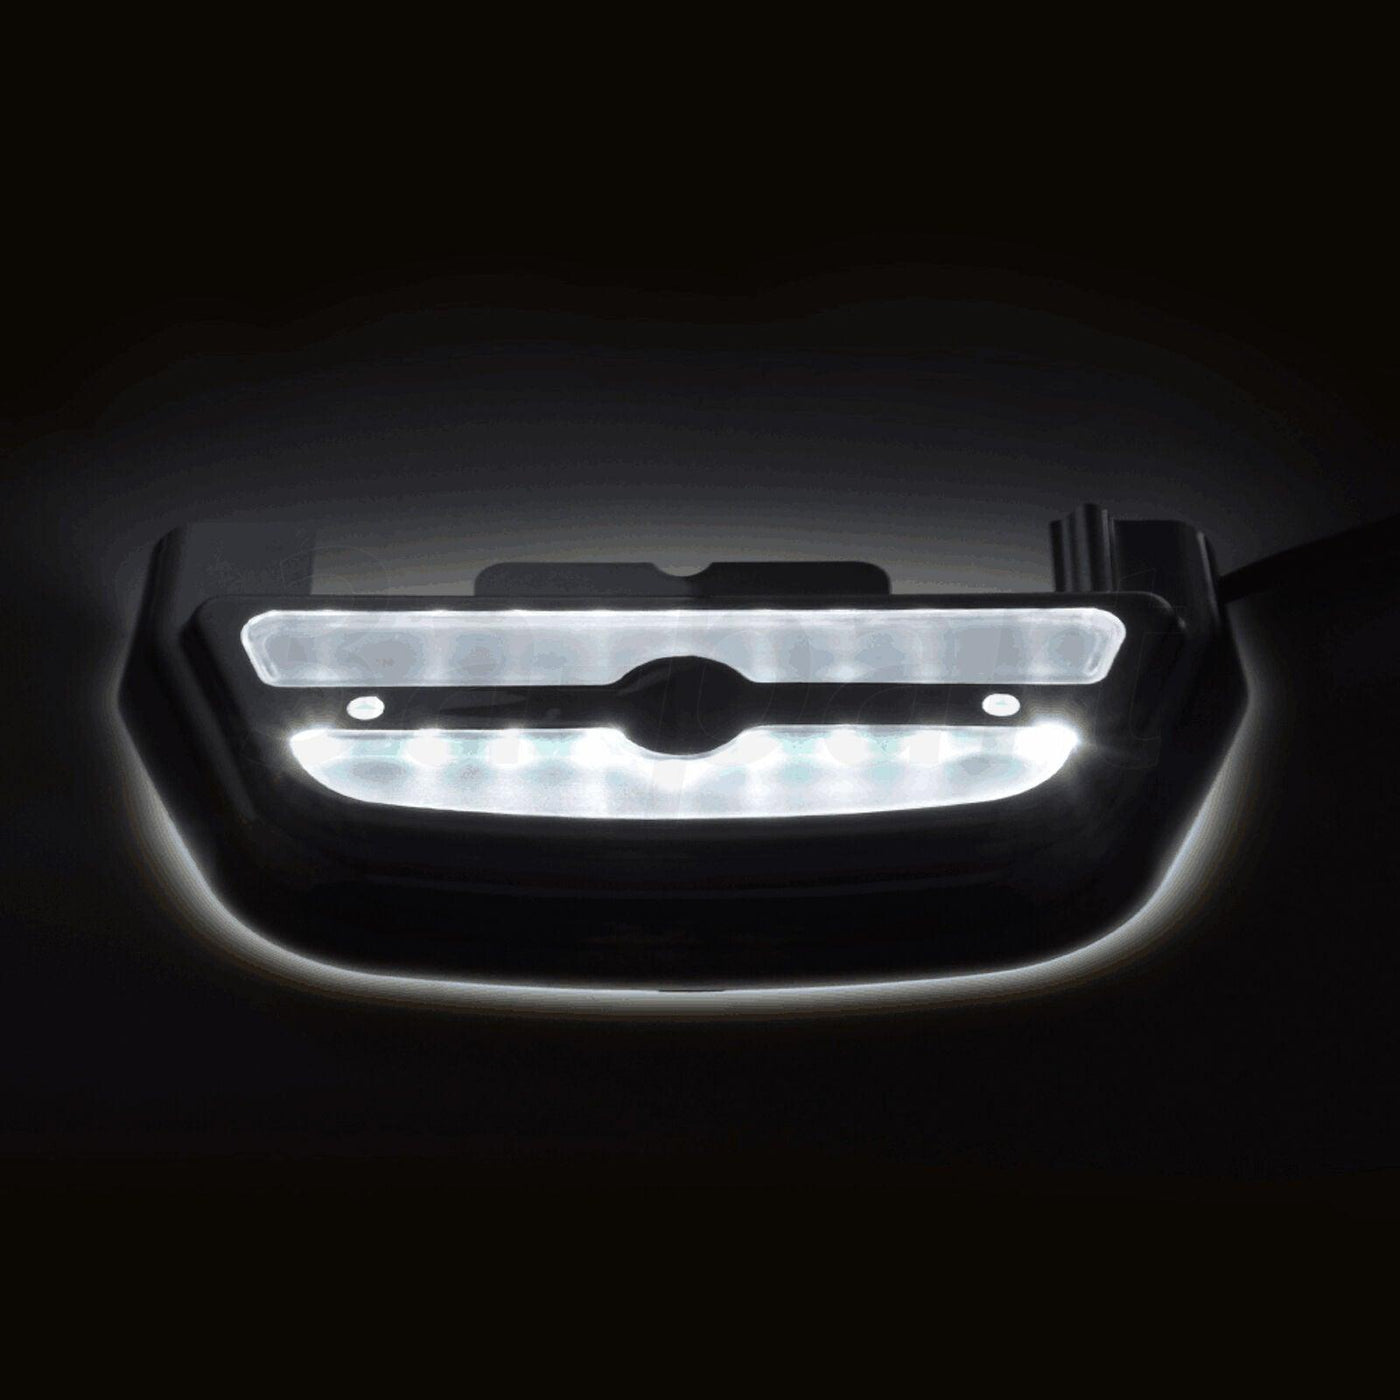 LED Light Passenger Footboard Floorboard Cover Fit For Harley Touring Sportster - Moto Life Products